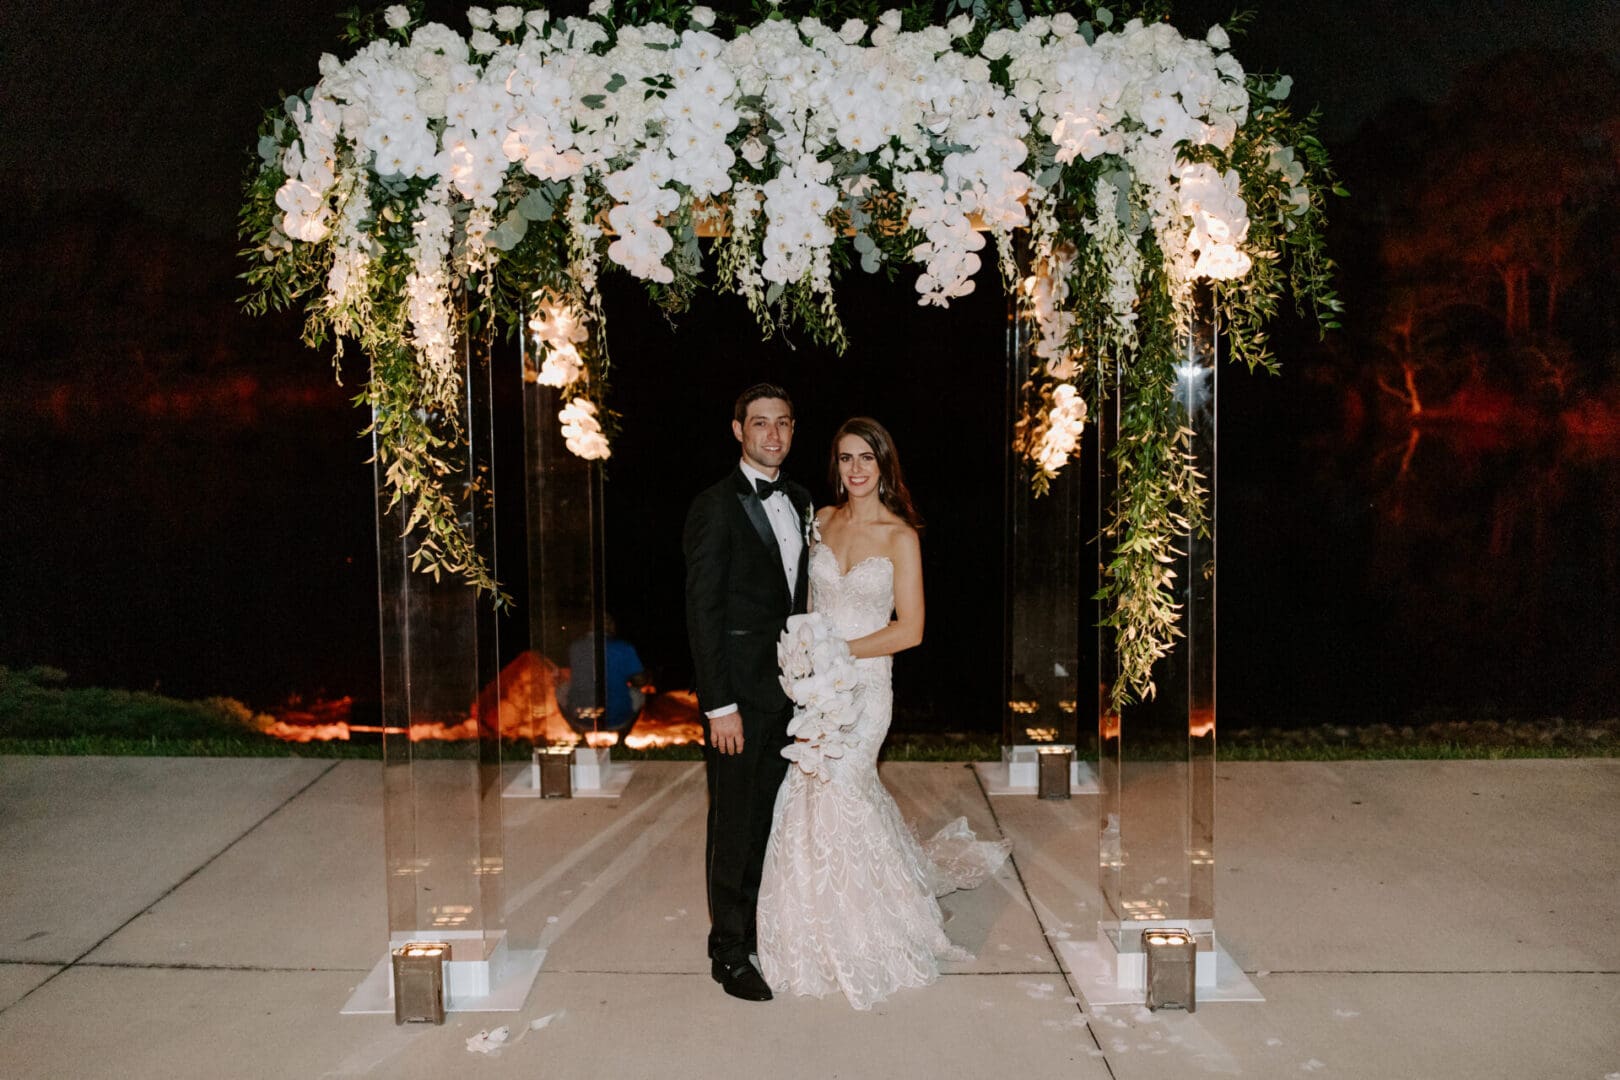 A bride and groom standing under a floral arch at night with candles lining the pathway.